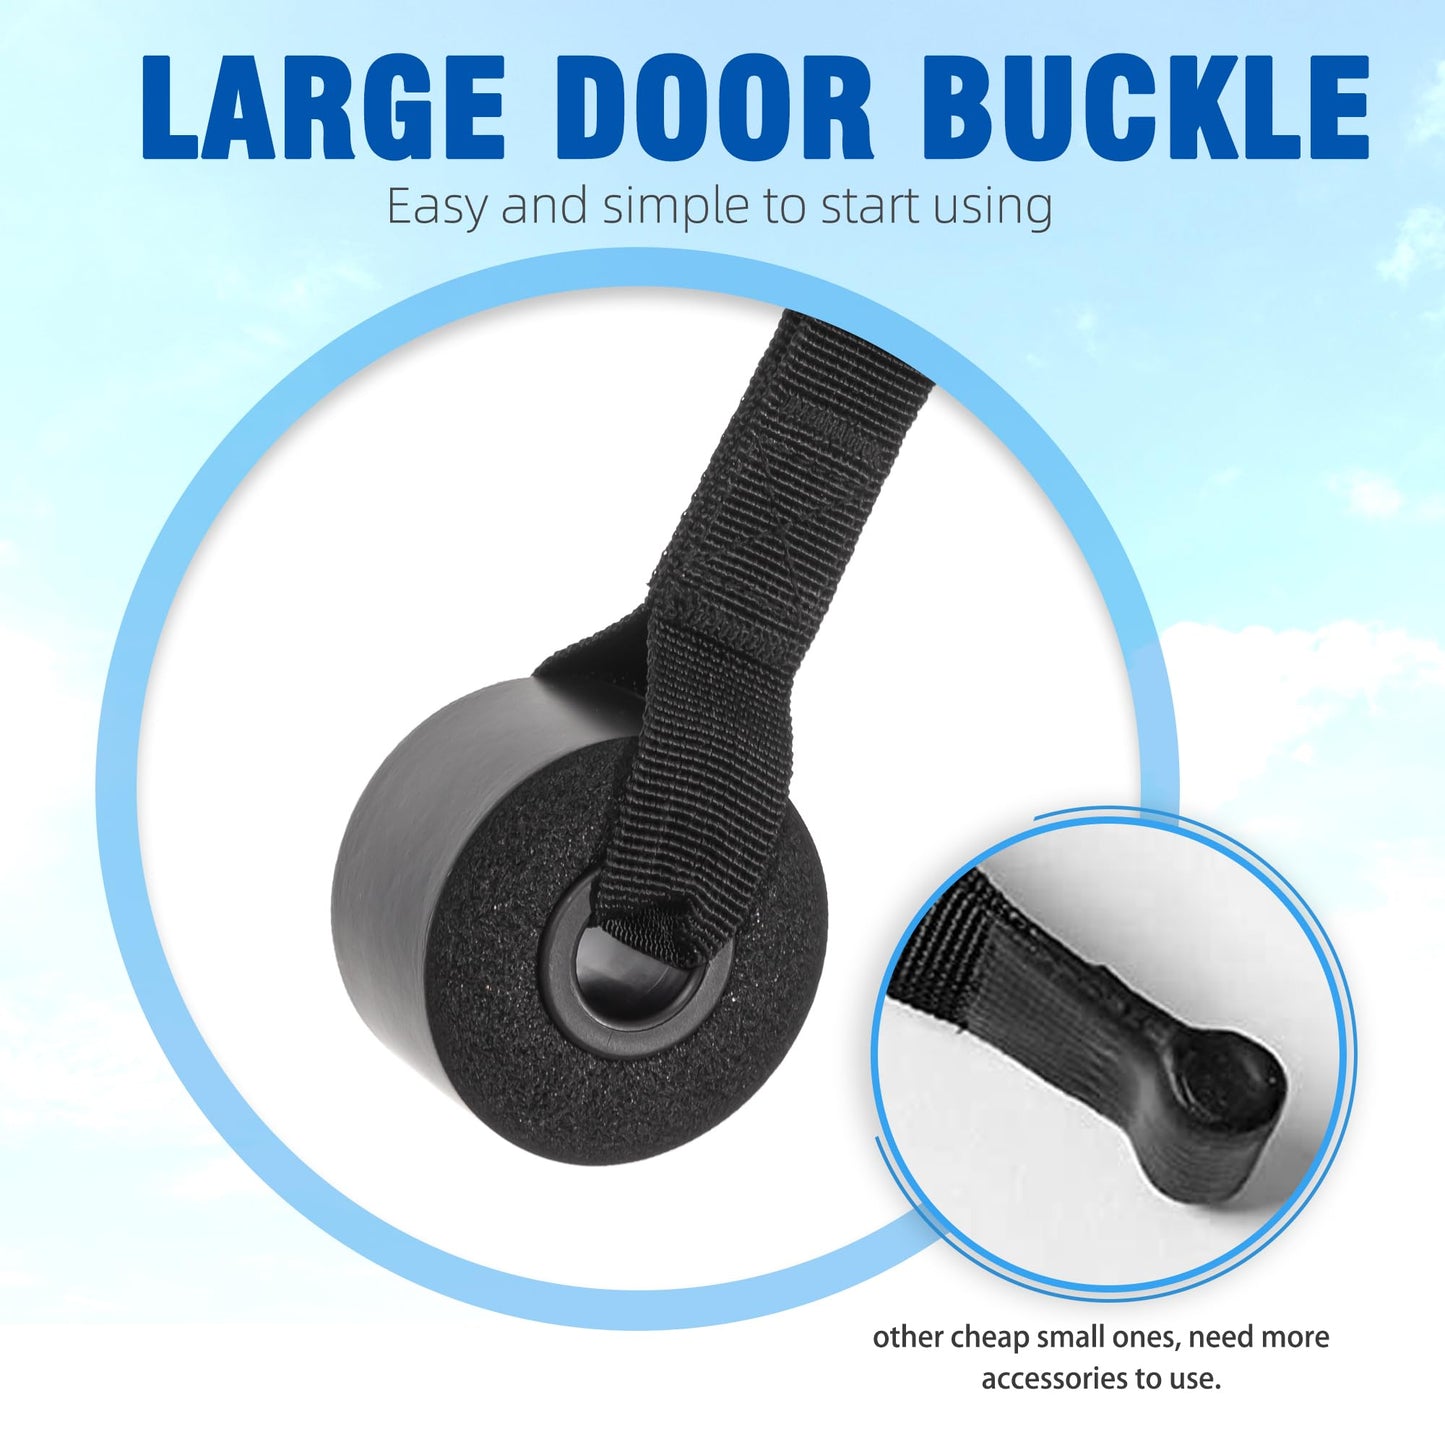 Shoulder Pulley, Over Door Rehab Exercise Pulley System, Physical Therapy Exercise Pulley for Rotator Cuff & Frozen Shoulder Recovery, Improve Shoulder Flexbility & Range of Motion